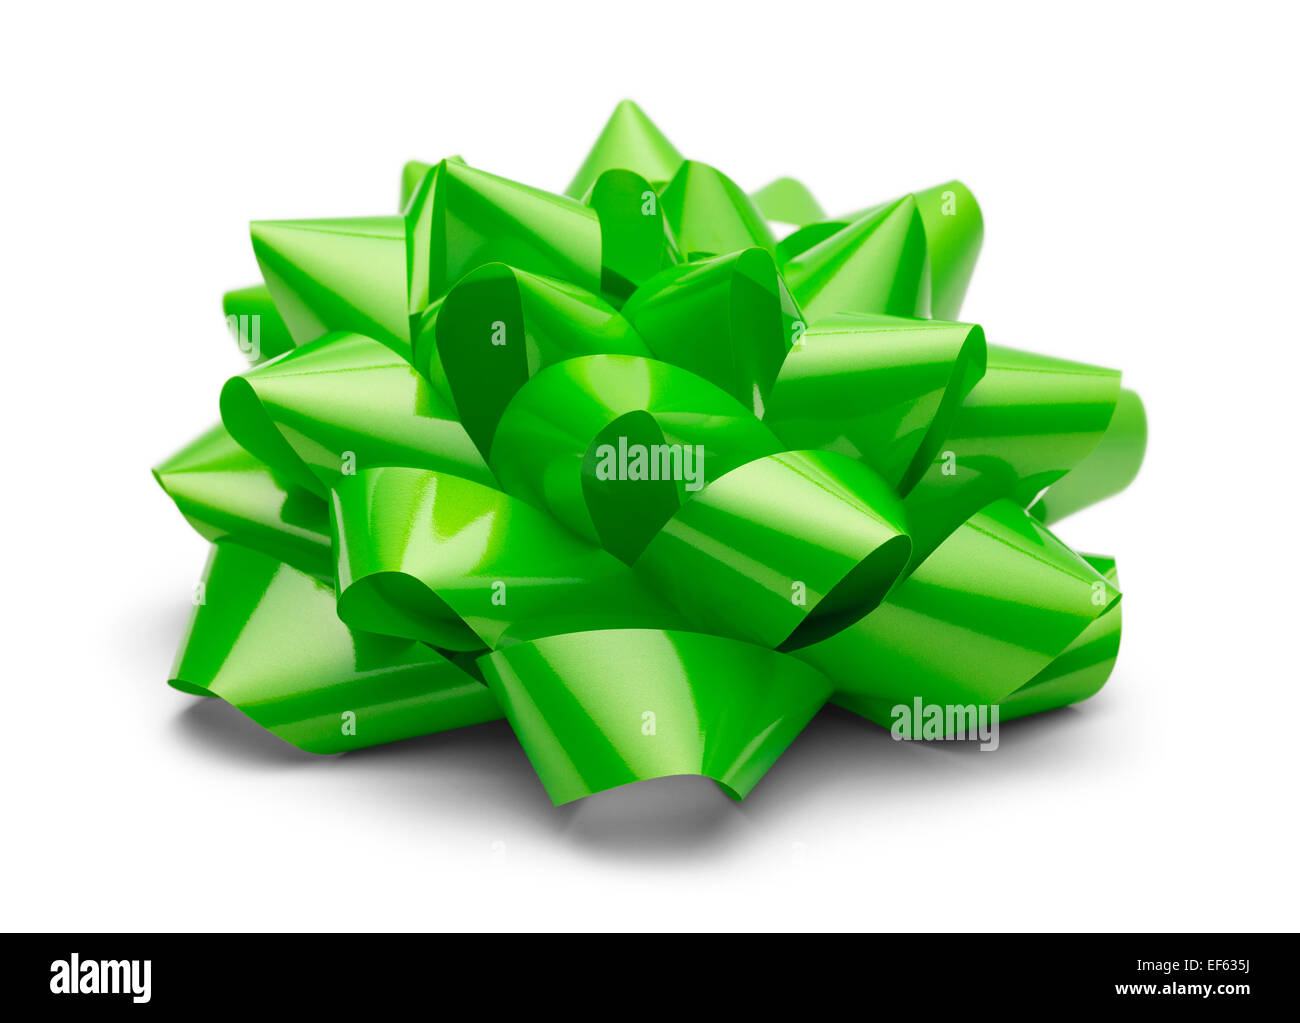 Green Satin Bow Side View Isolated on White Background. Stock Photo